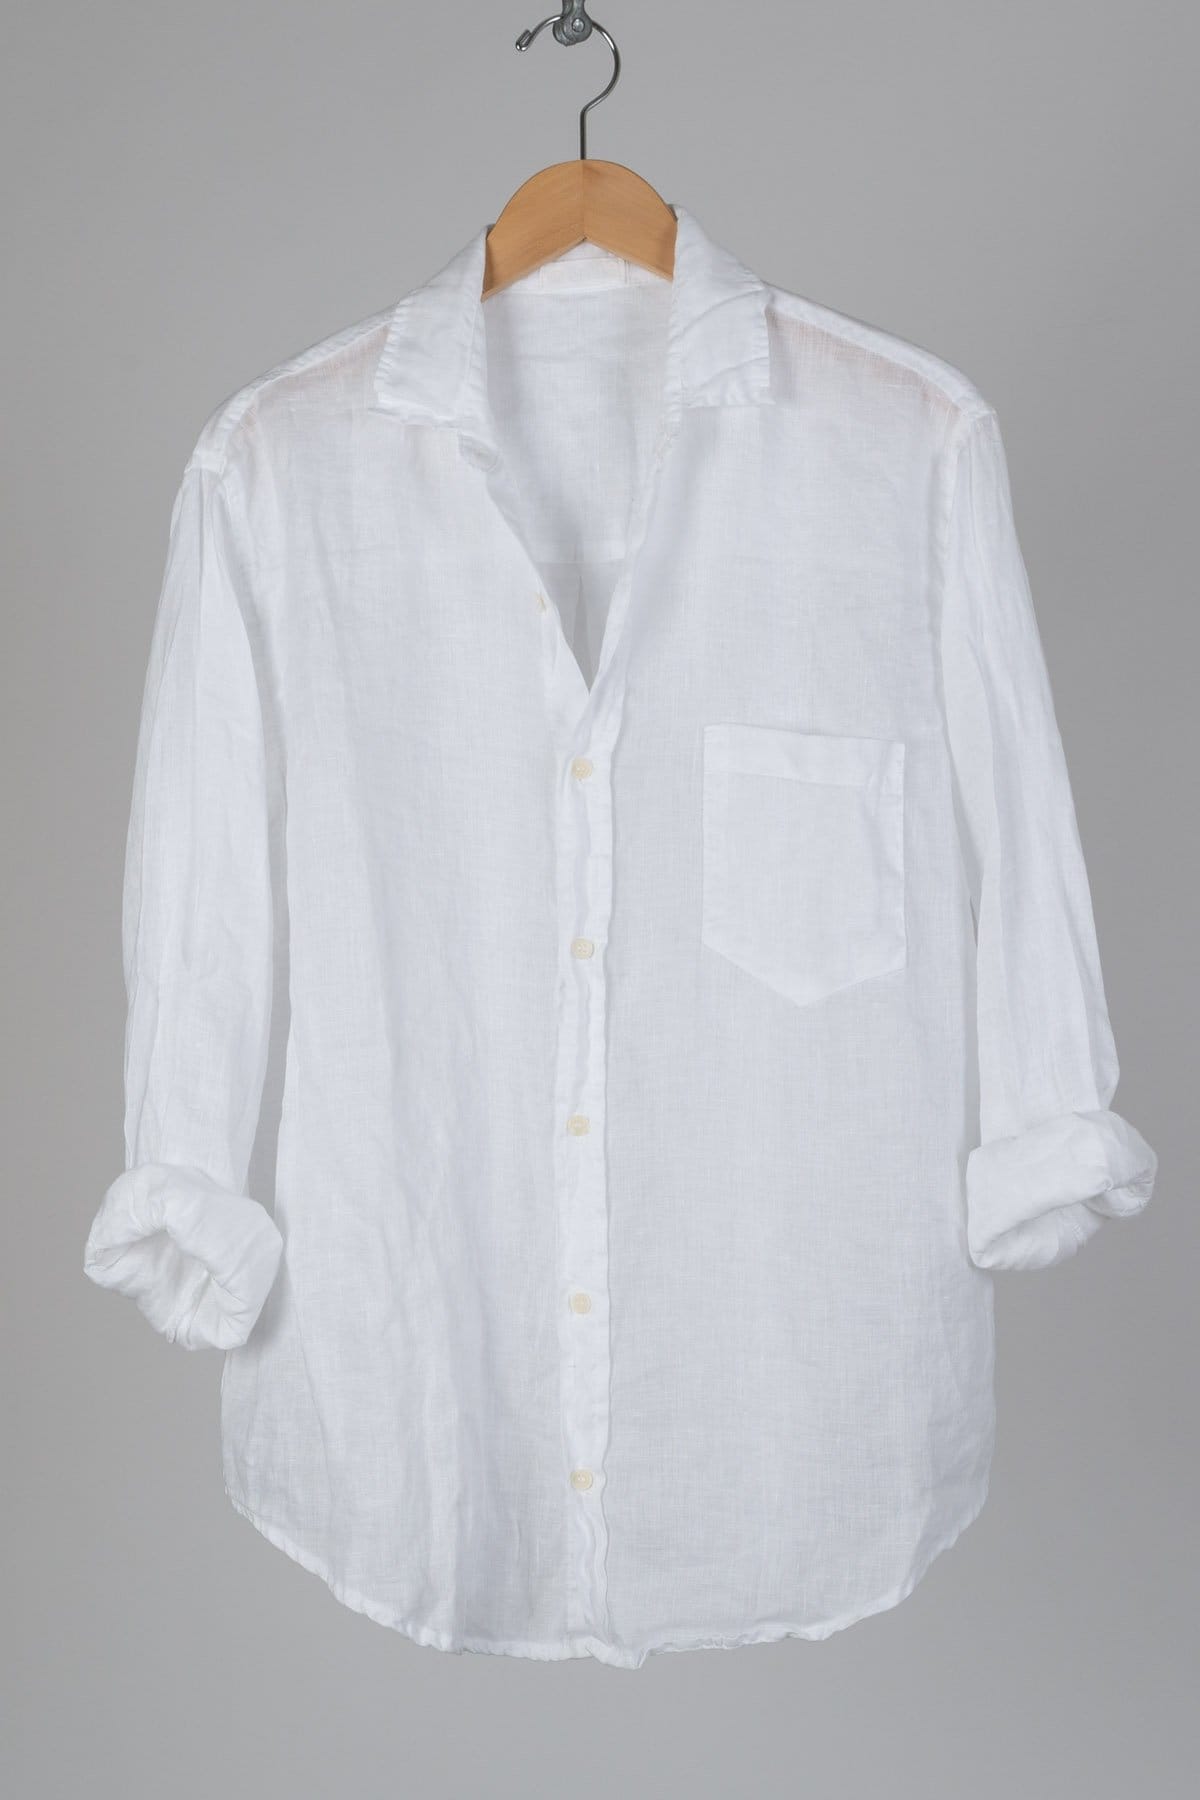 Button up collared shirt with a bust patch pocket and a box pleat on the back.